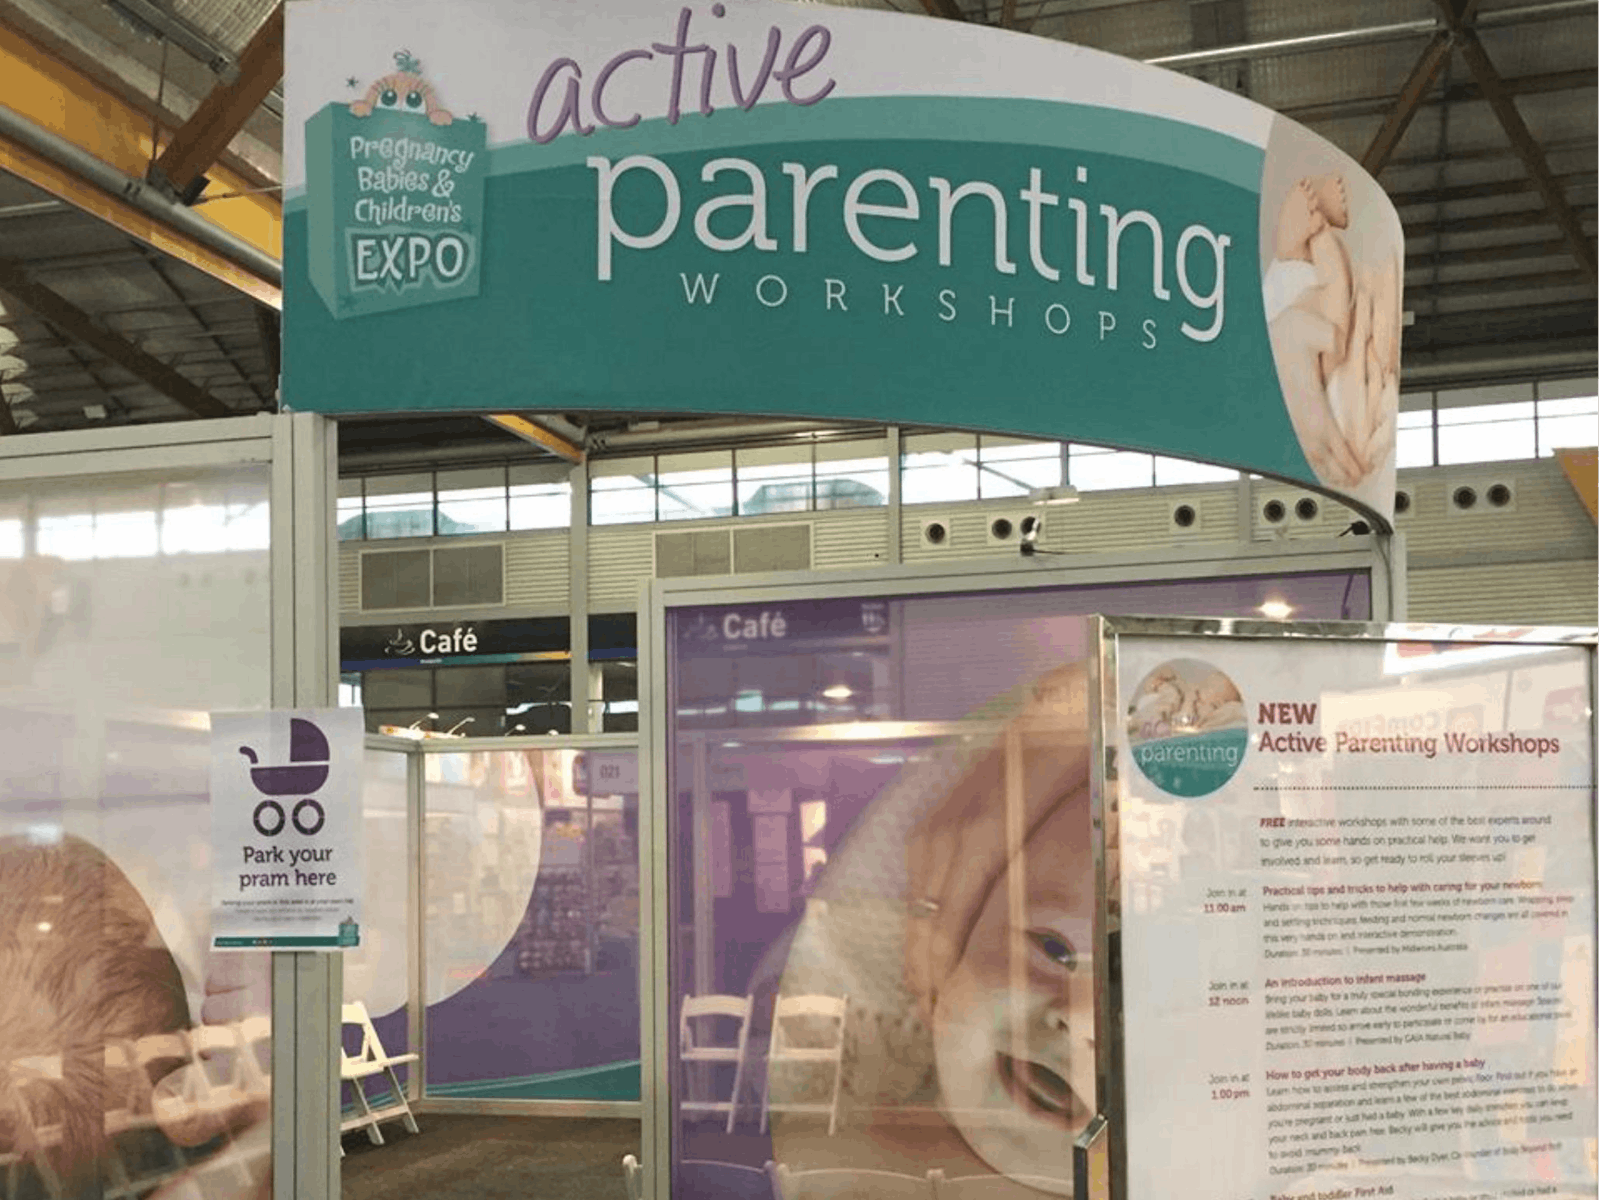 Image for Pregnancy Babies and Children's Expo